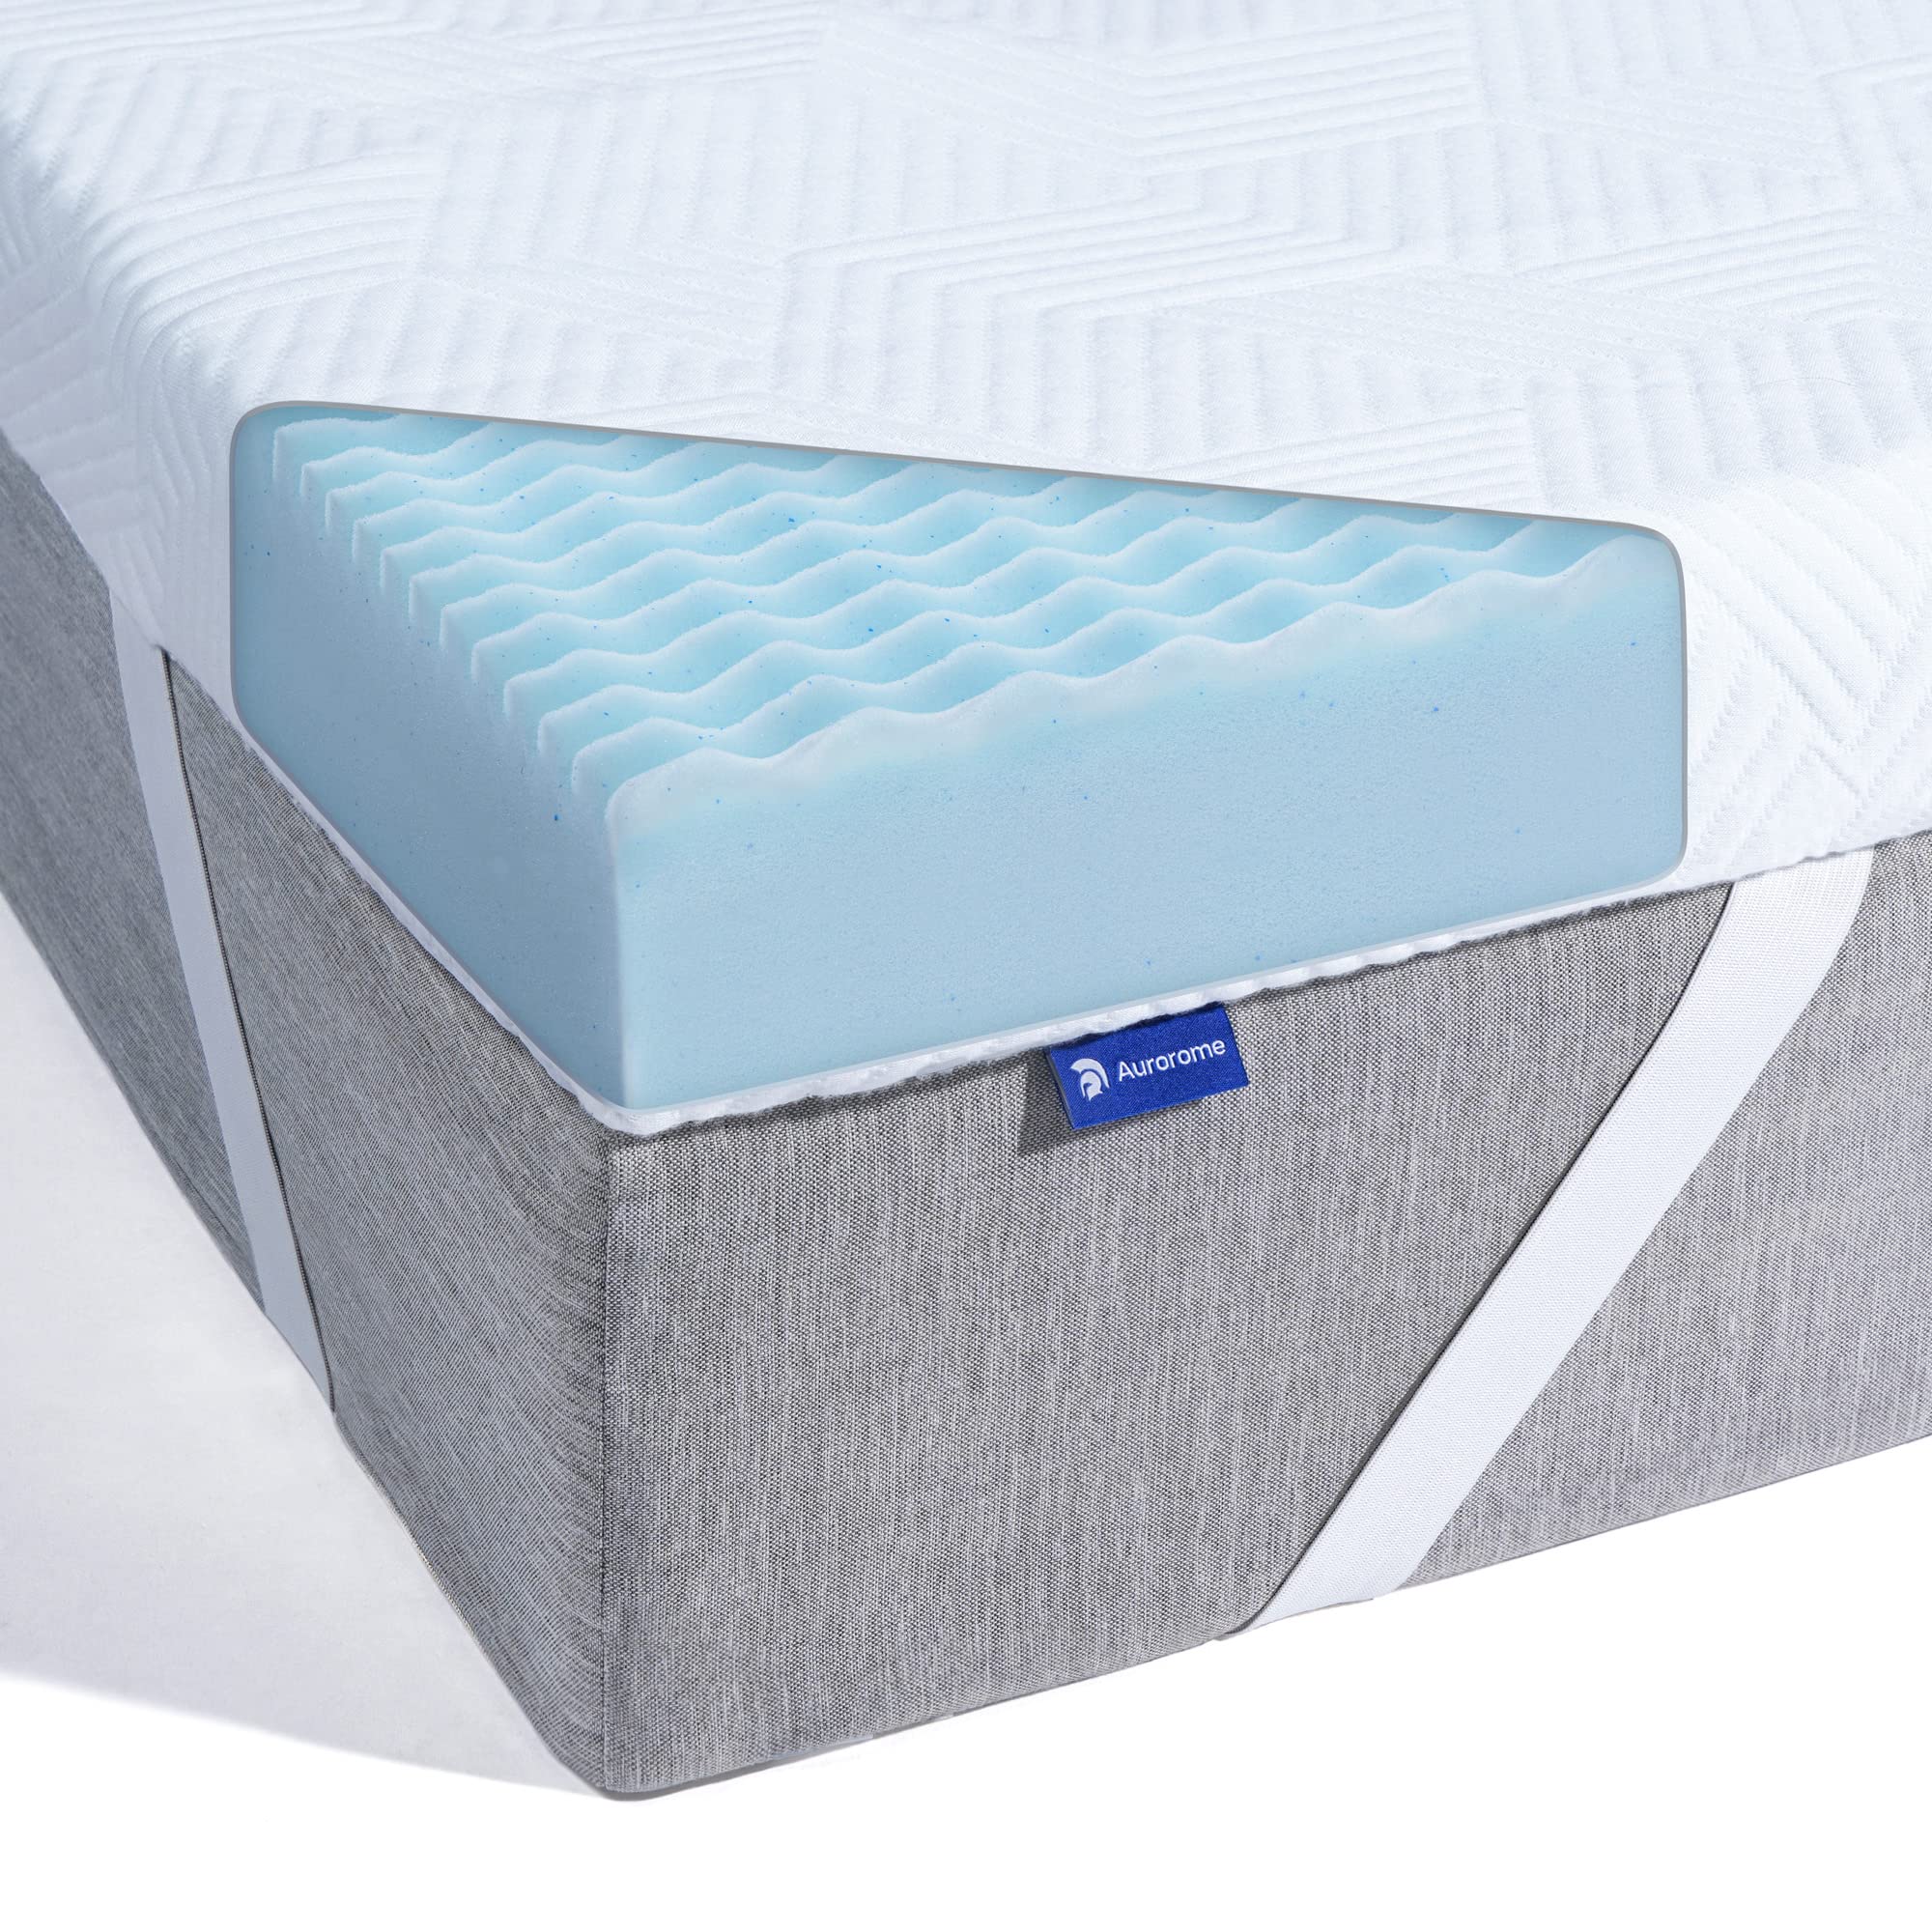 Aurorome 5 Zone Gel Memory Foam Mattress Topper Double Size Bed - Pressure Relief Mattress Topper with Washable Zippered Cover - Double Size - 135x190x5cm